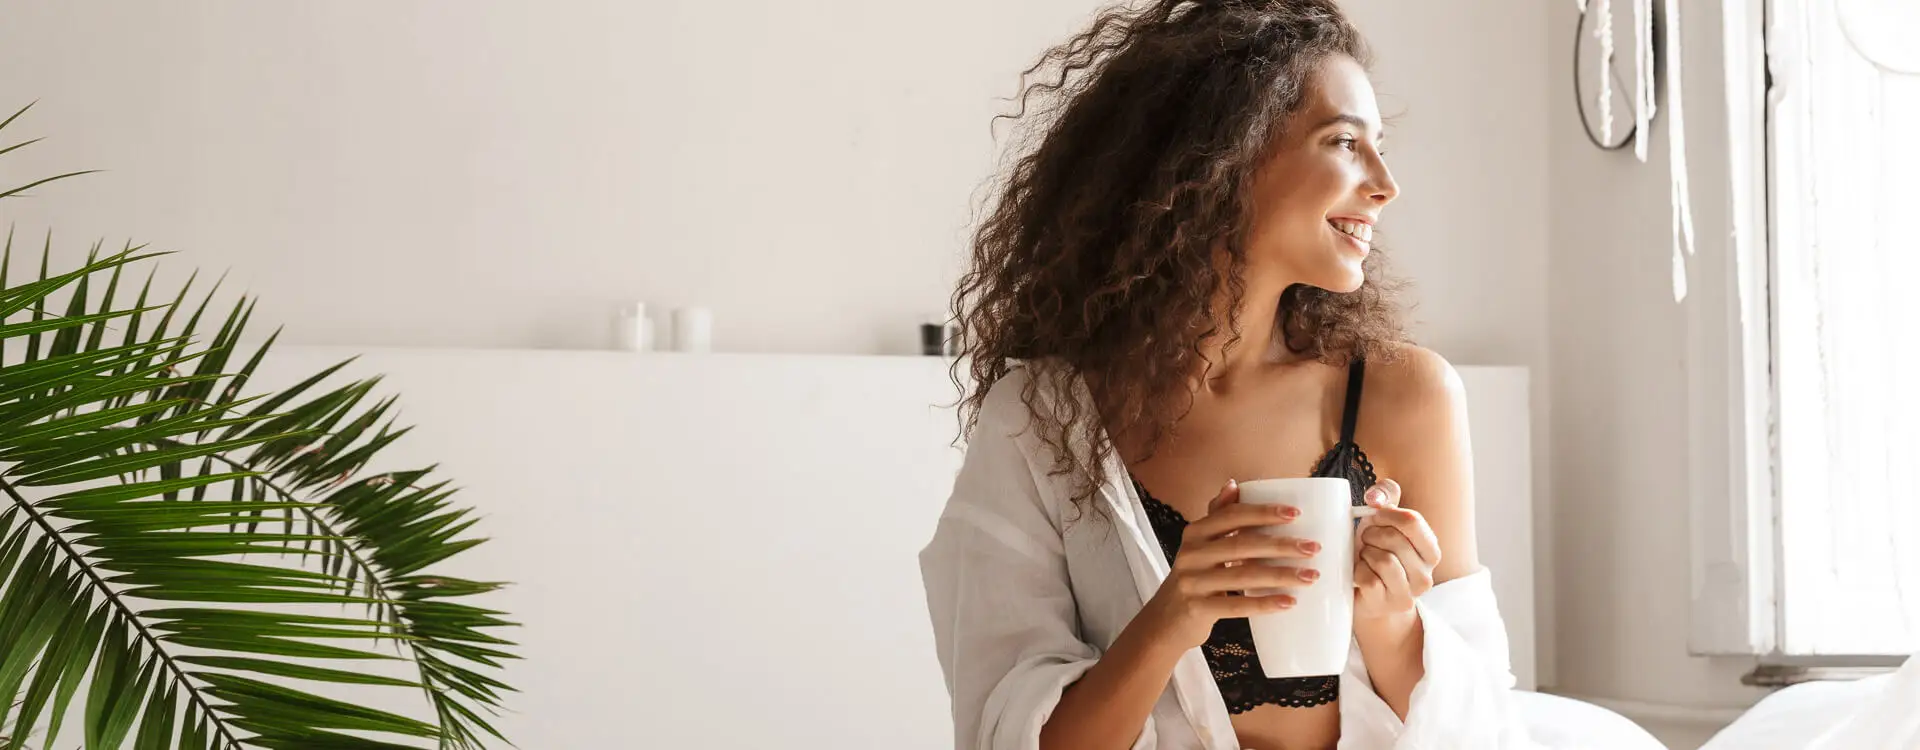 Woman smiling staring off holding a cup